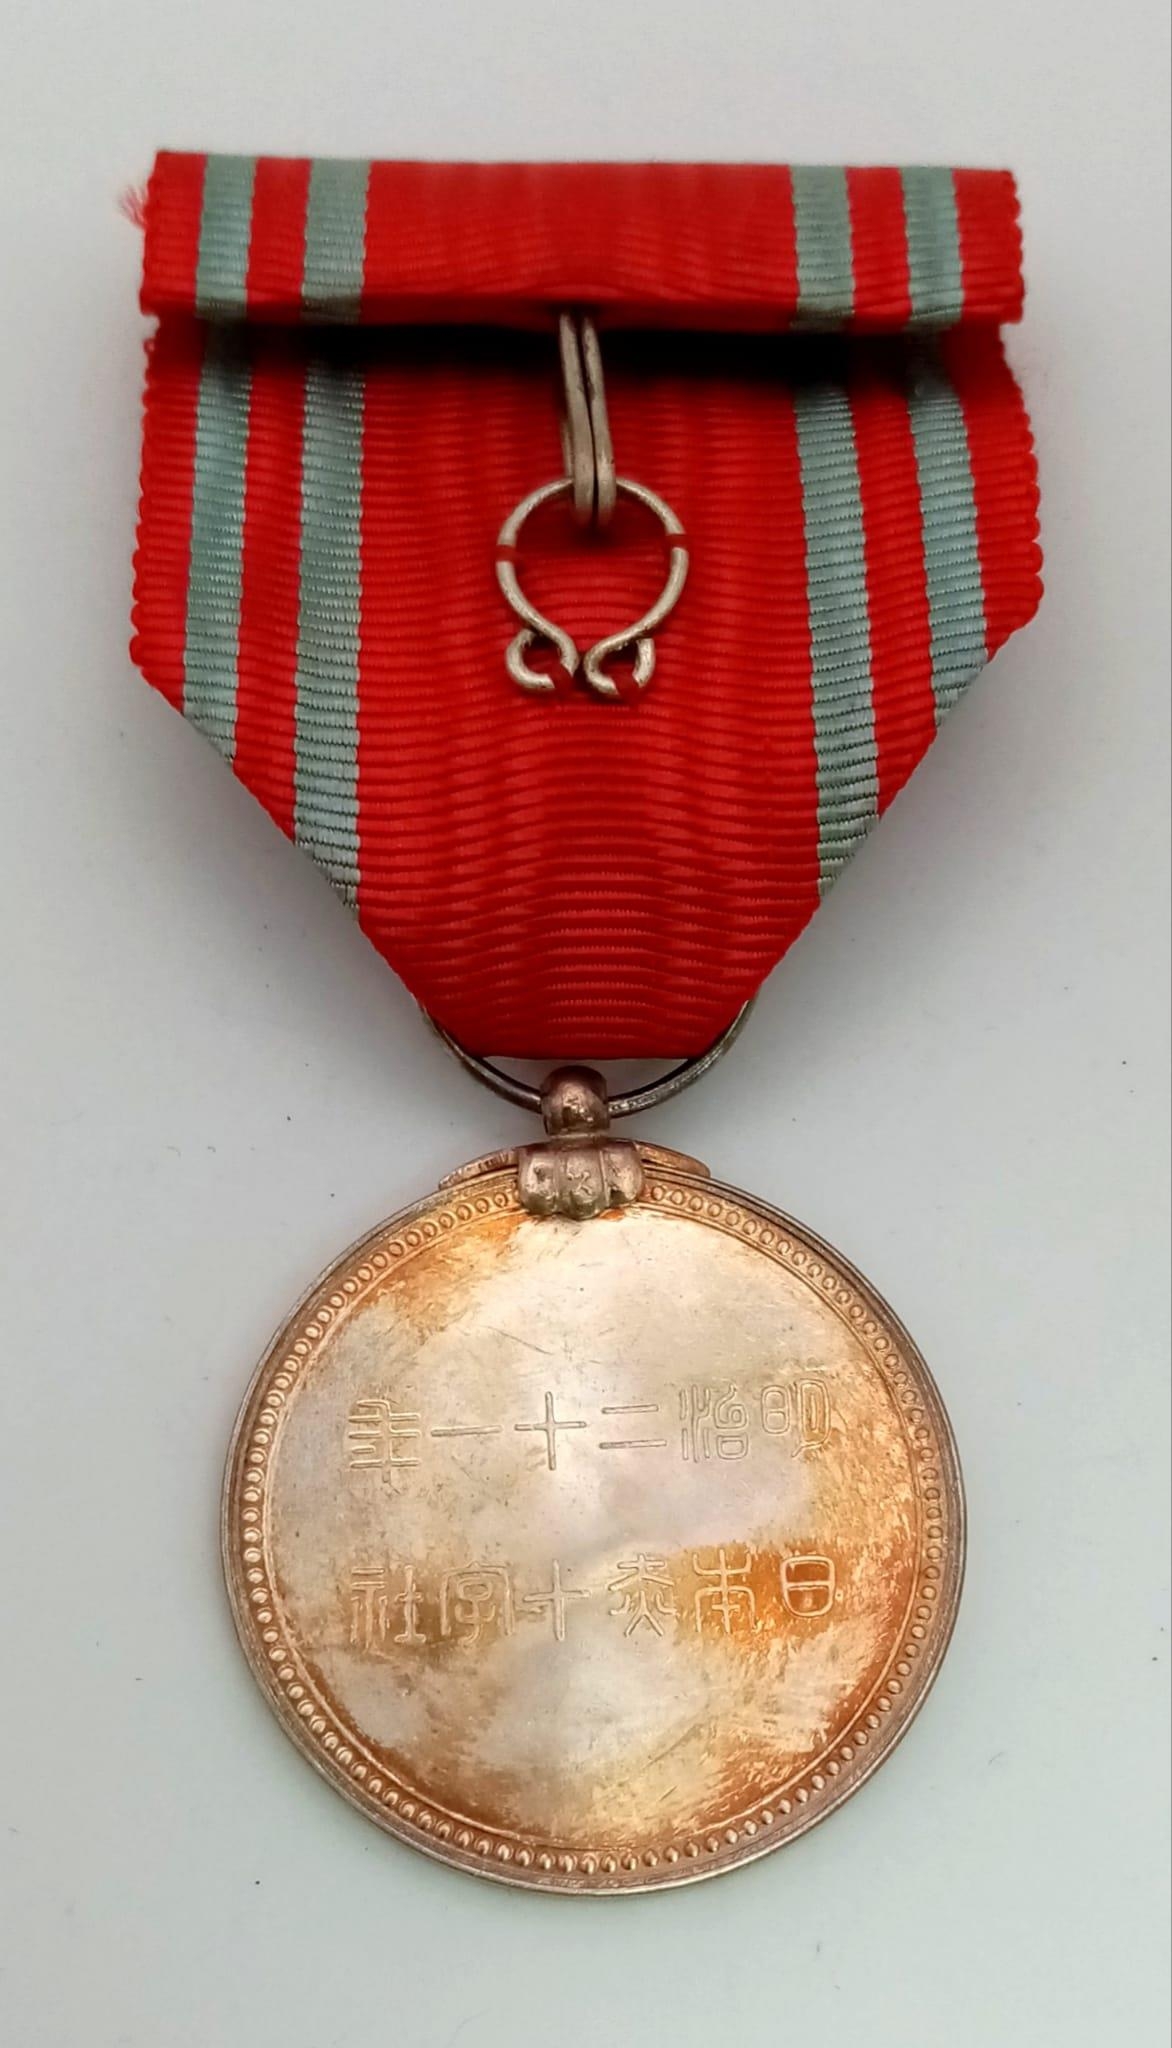 Japanese WW2 Red Cross Order Medal with Rosette, comes in Original Presentation Box. - Image 2 of 4